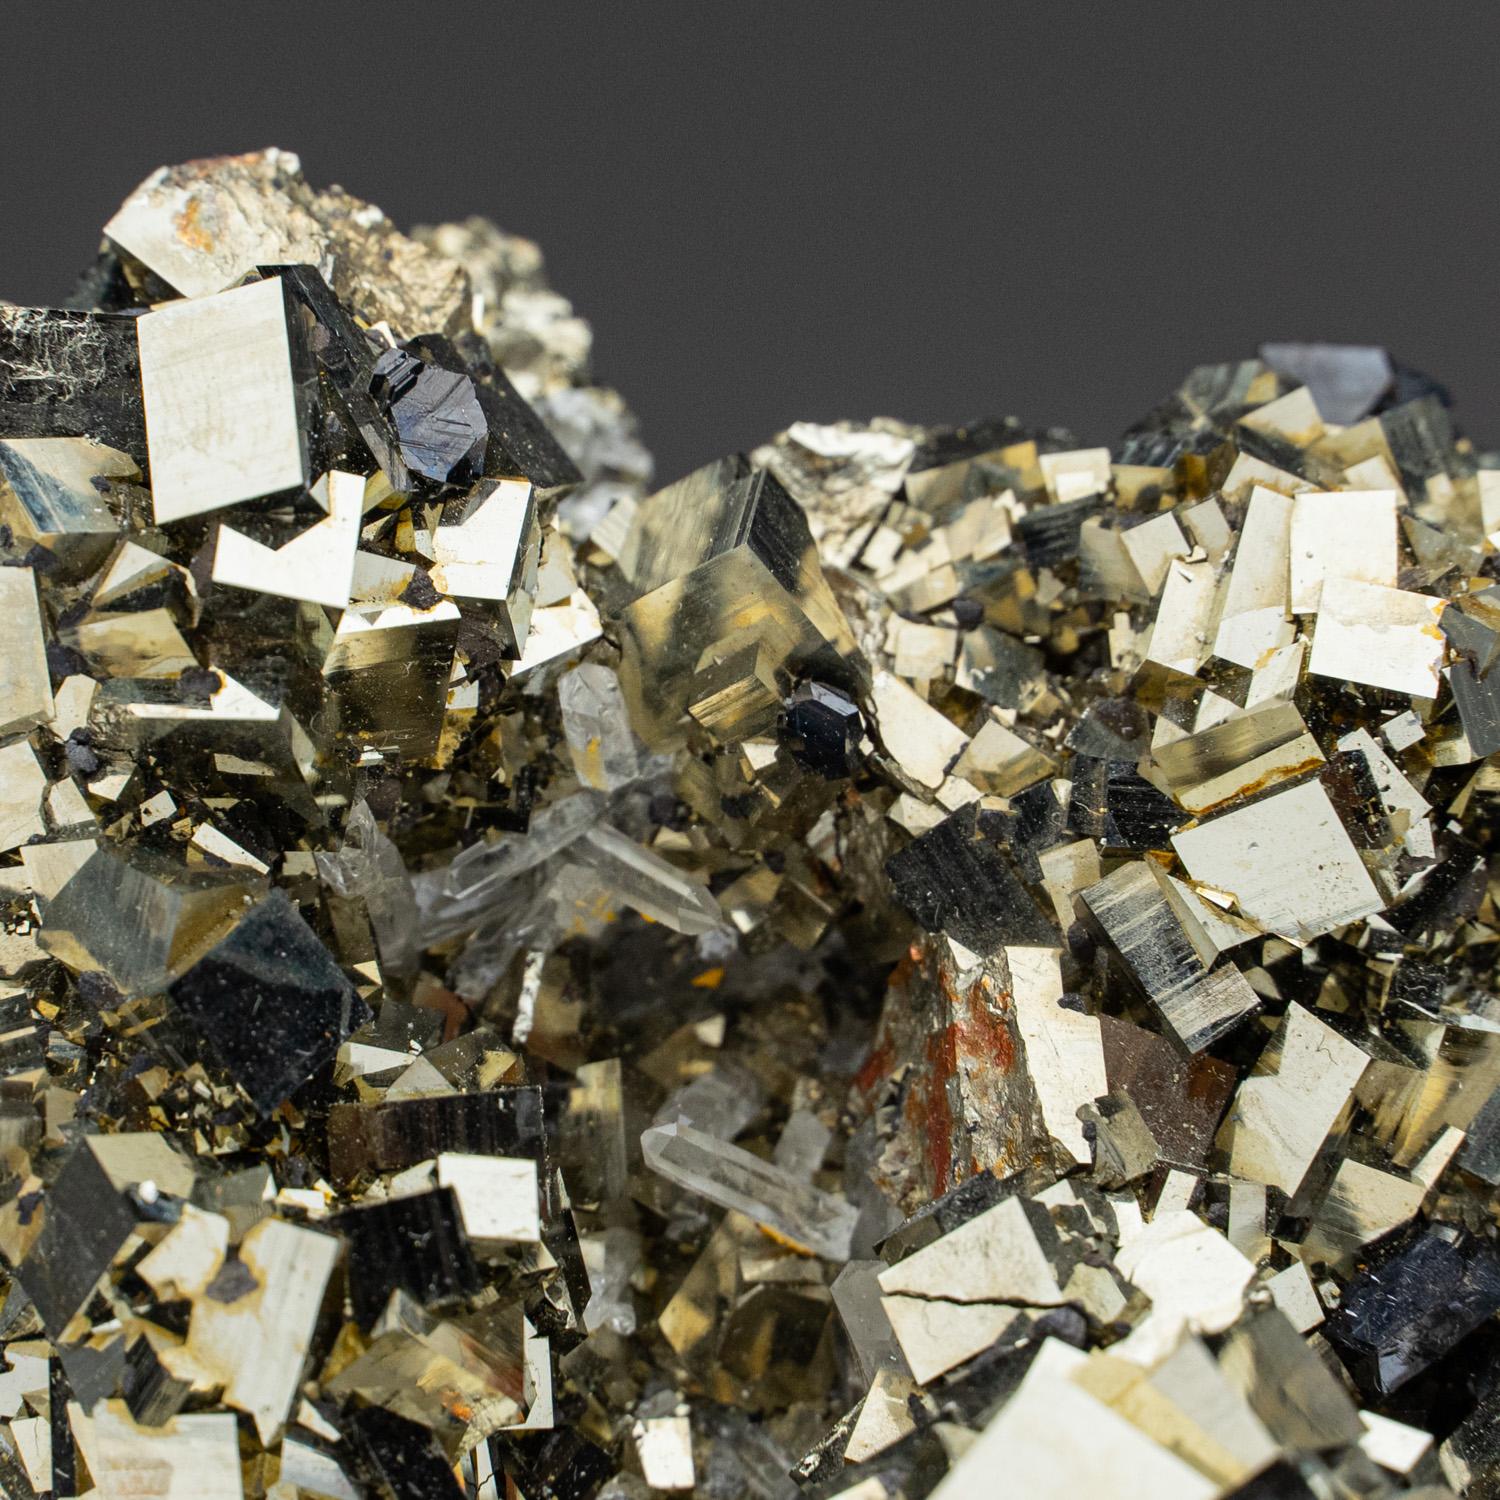 From Madan District, Rhodope Mountains, Bulgaria Sculptural formation of lustrous yellow-metallic pyrite crystals with Sphalerite. The pyrite crystals are cubic form with pyritohedral striations on the surfaces. The combination of the two minerals